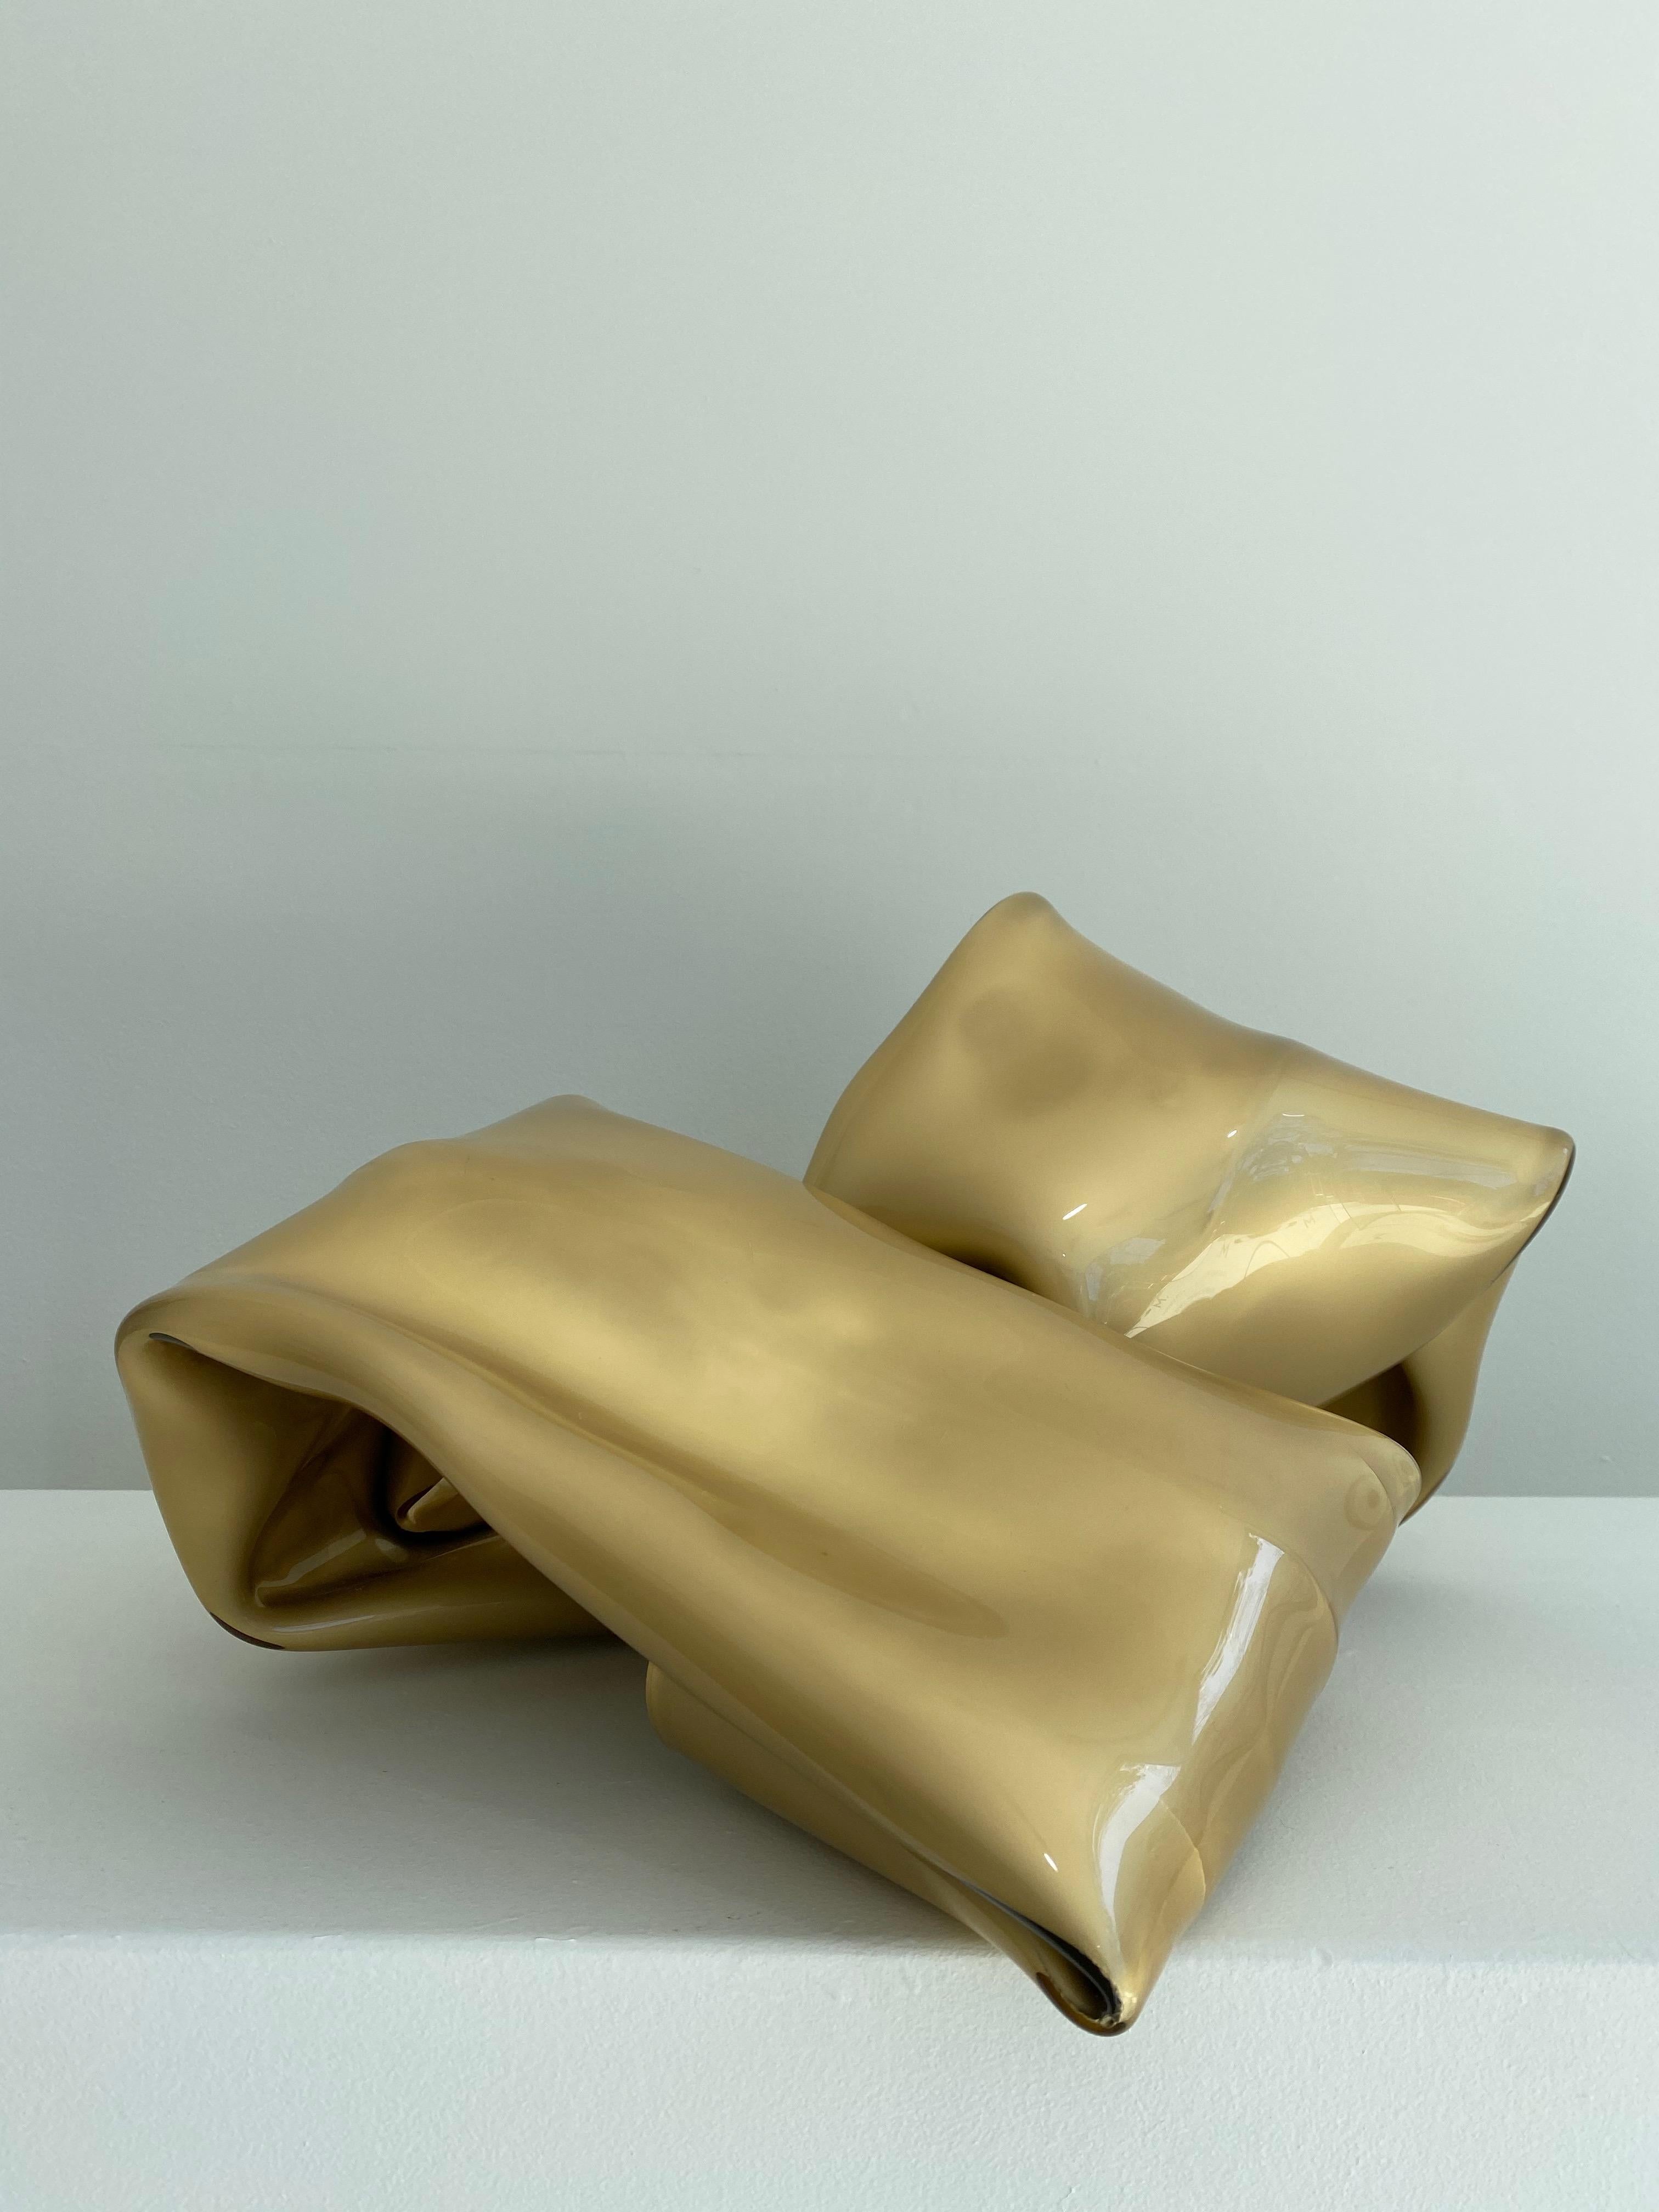 'Double Gold Wall Cuff', Metallic contemporary abstract sculpture - Sculpture by Anya Pesce